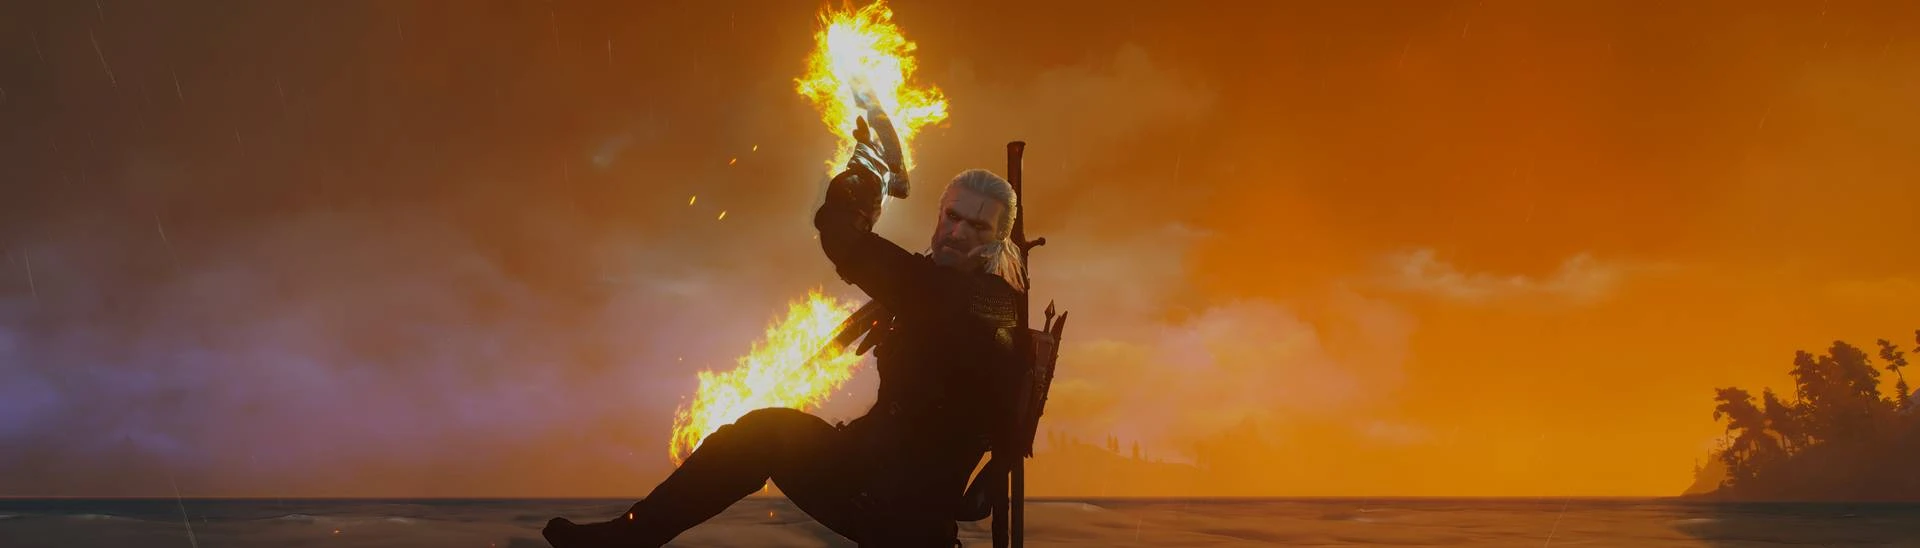 The Witcher 3 Magic Spells Mod Offers New Magic Casting Abilities for Geralt